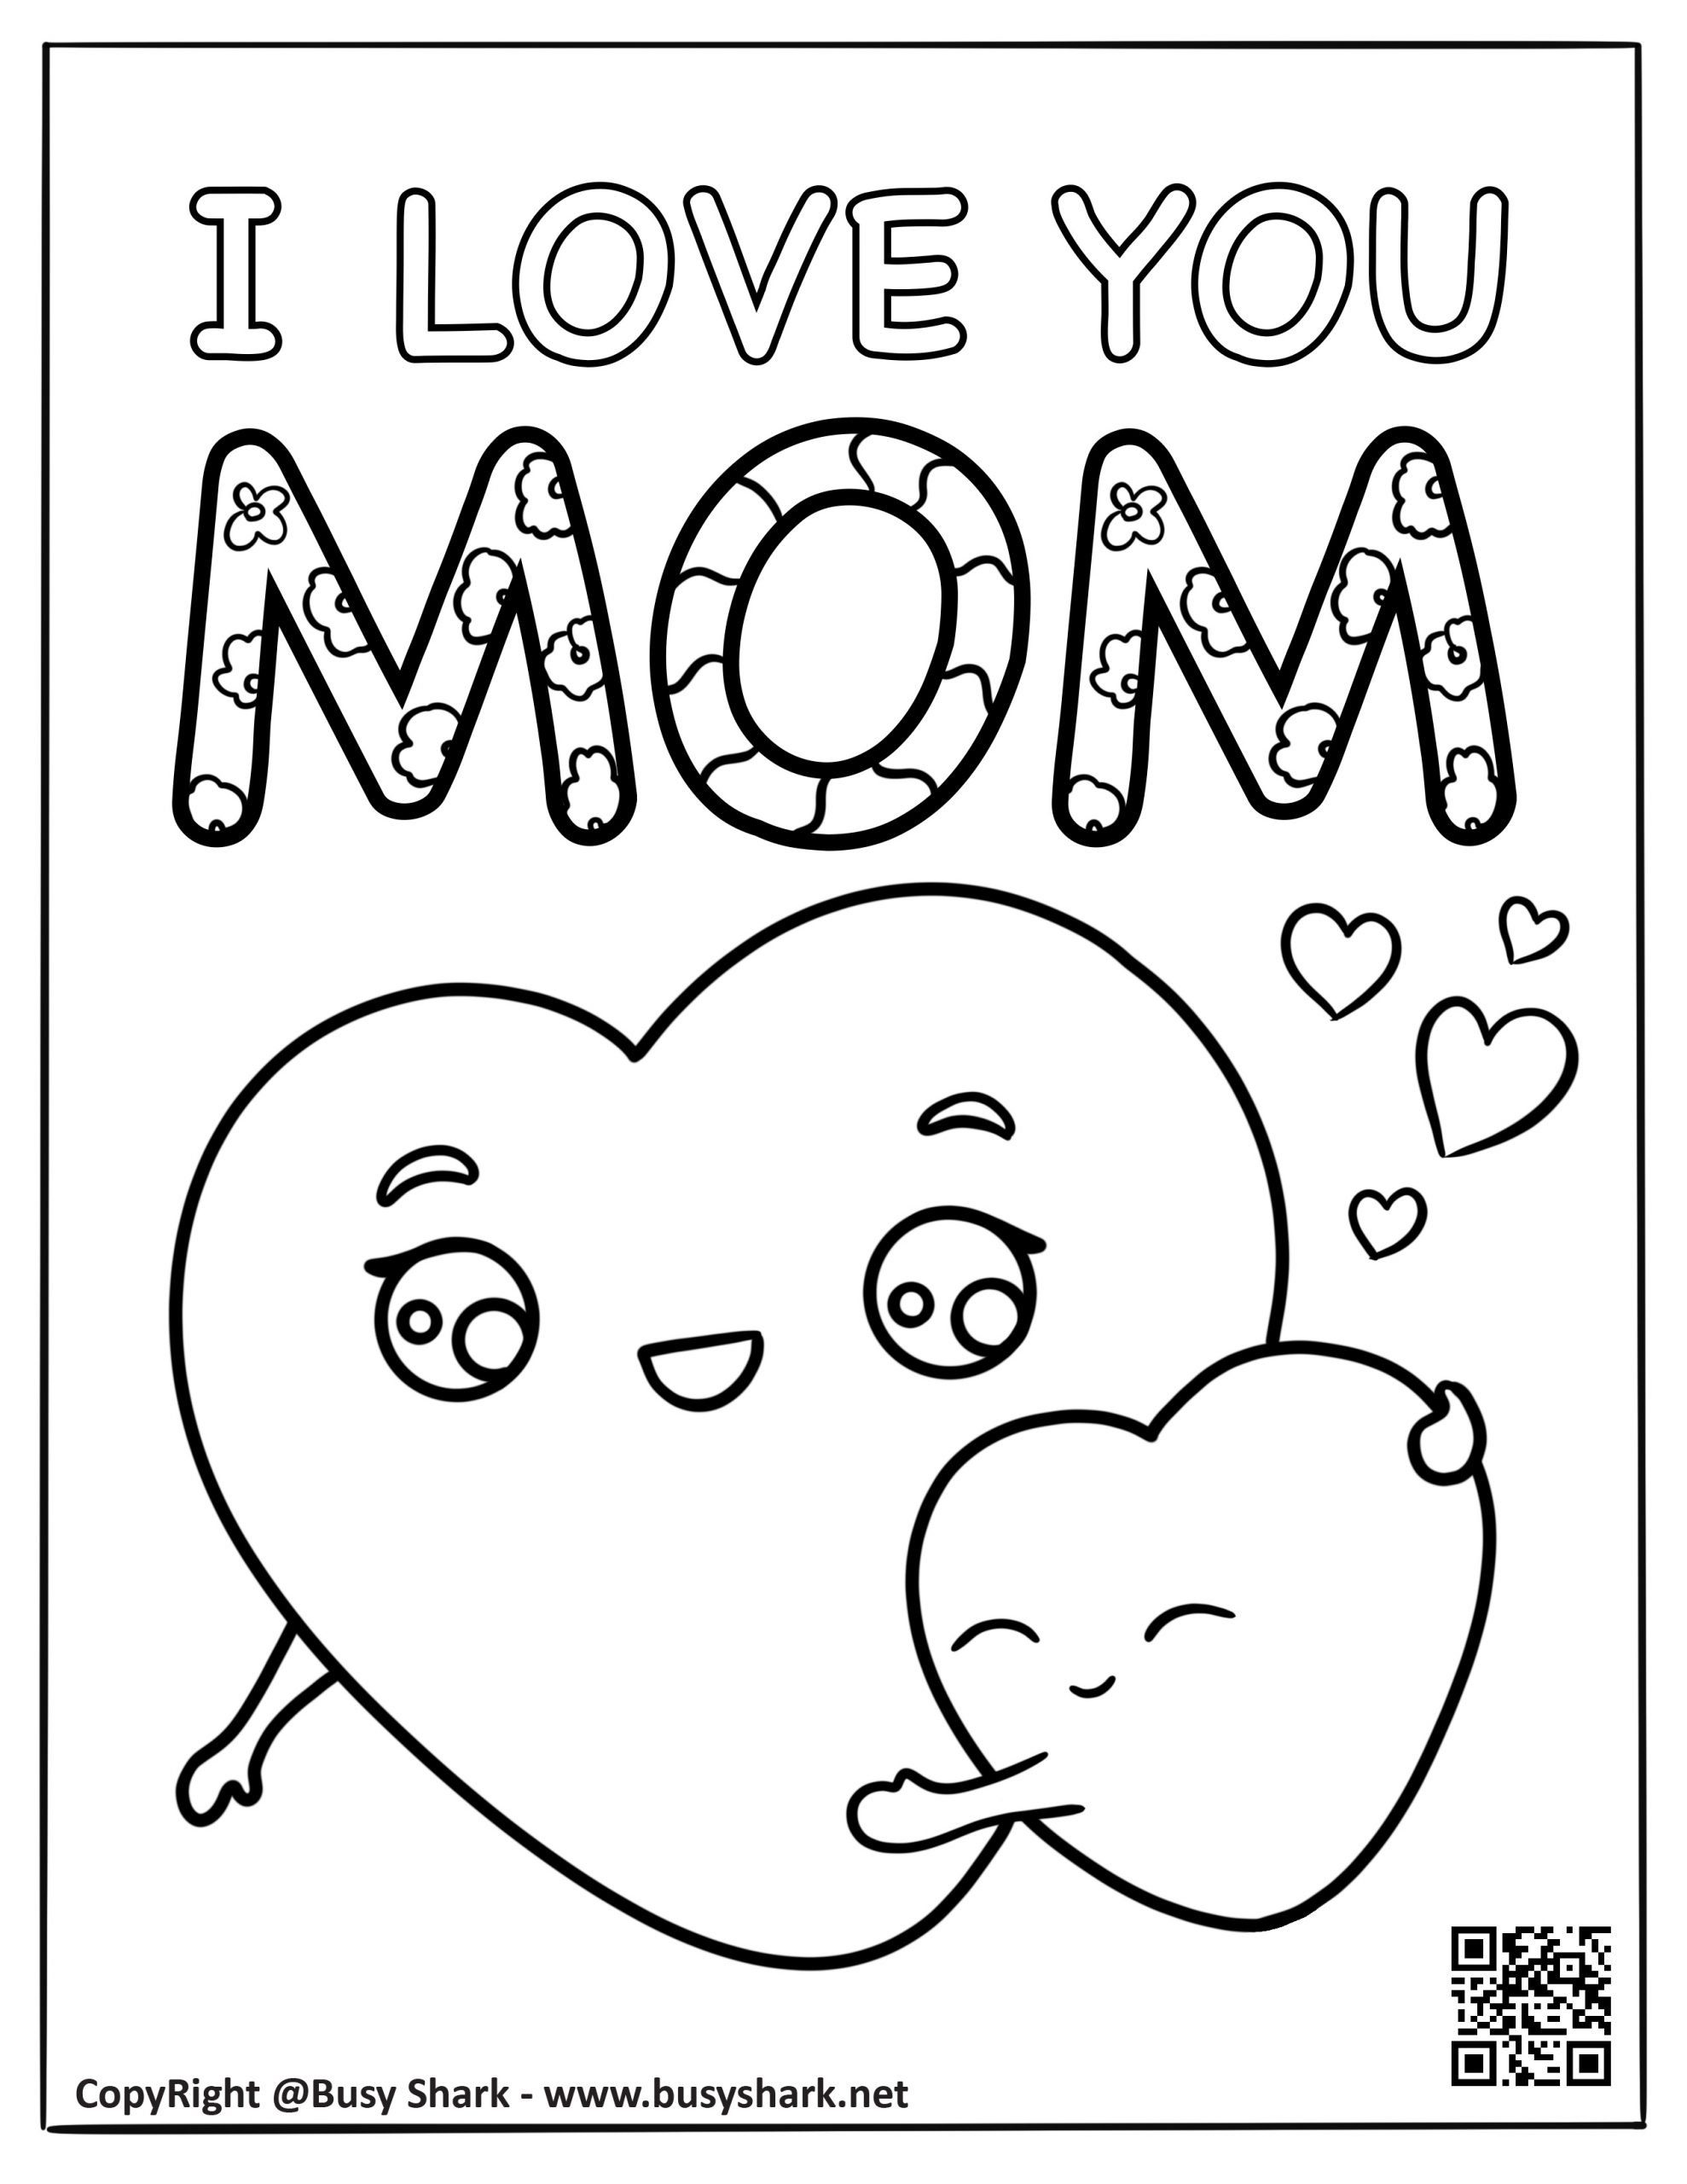 Mothers day coloring page free printable